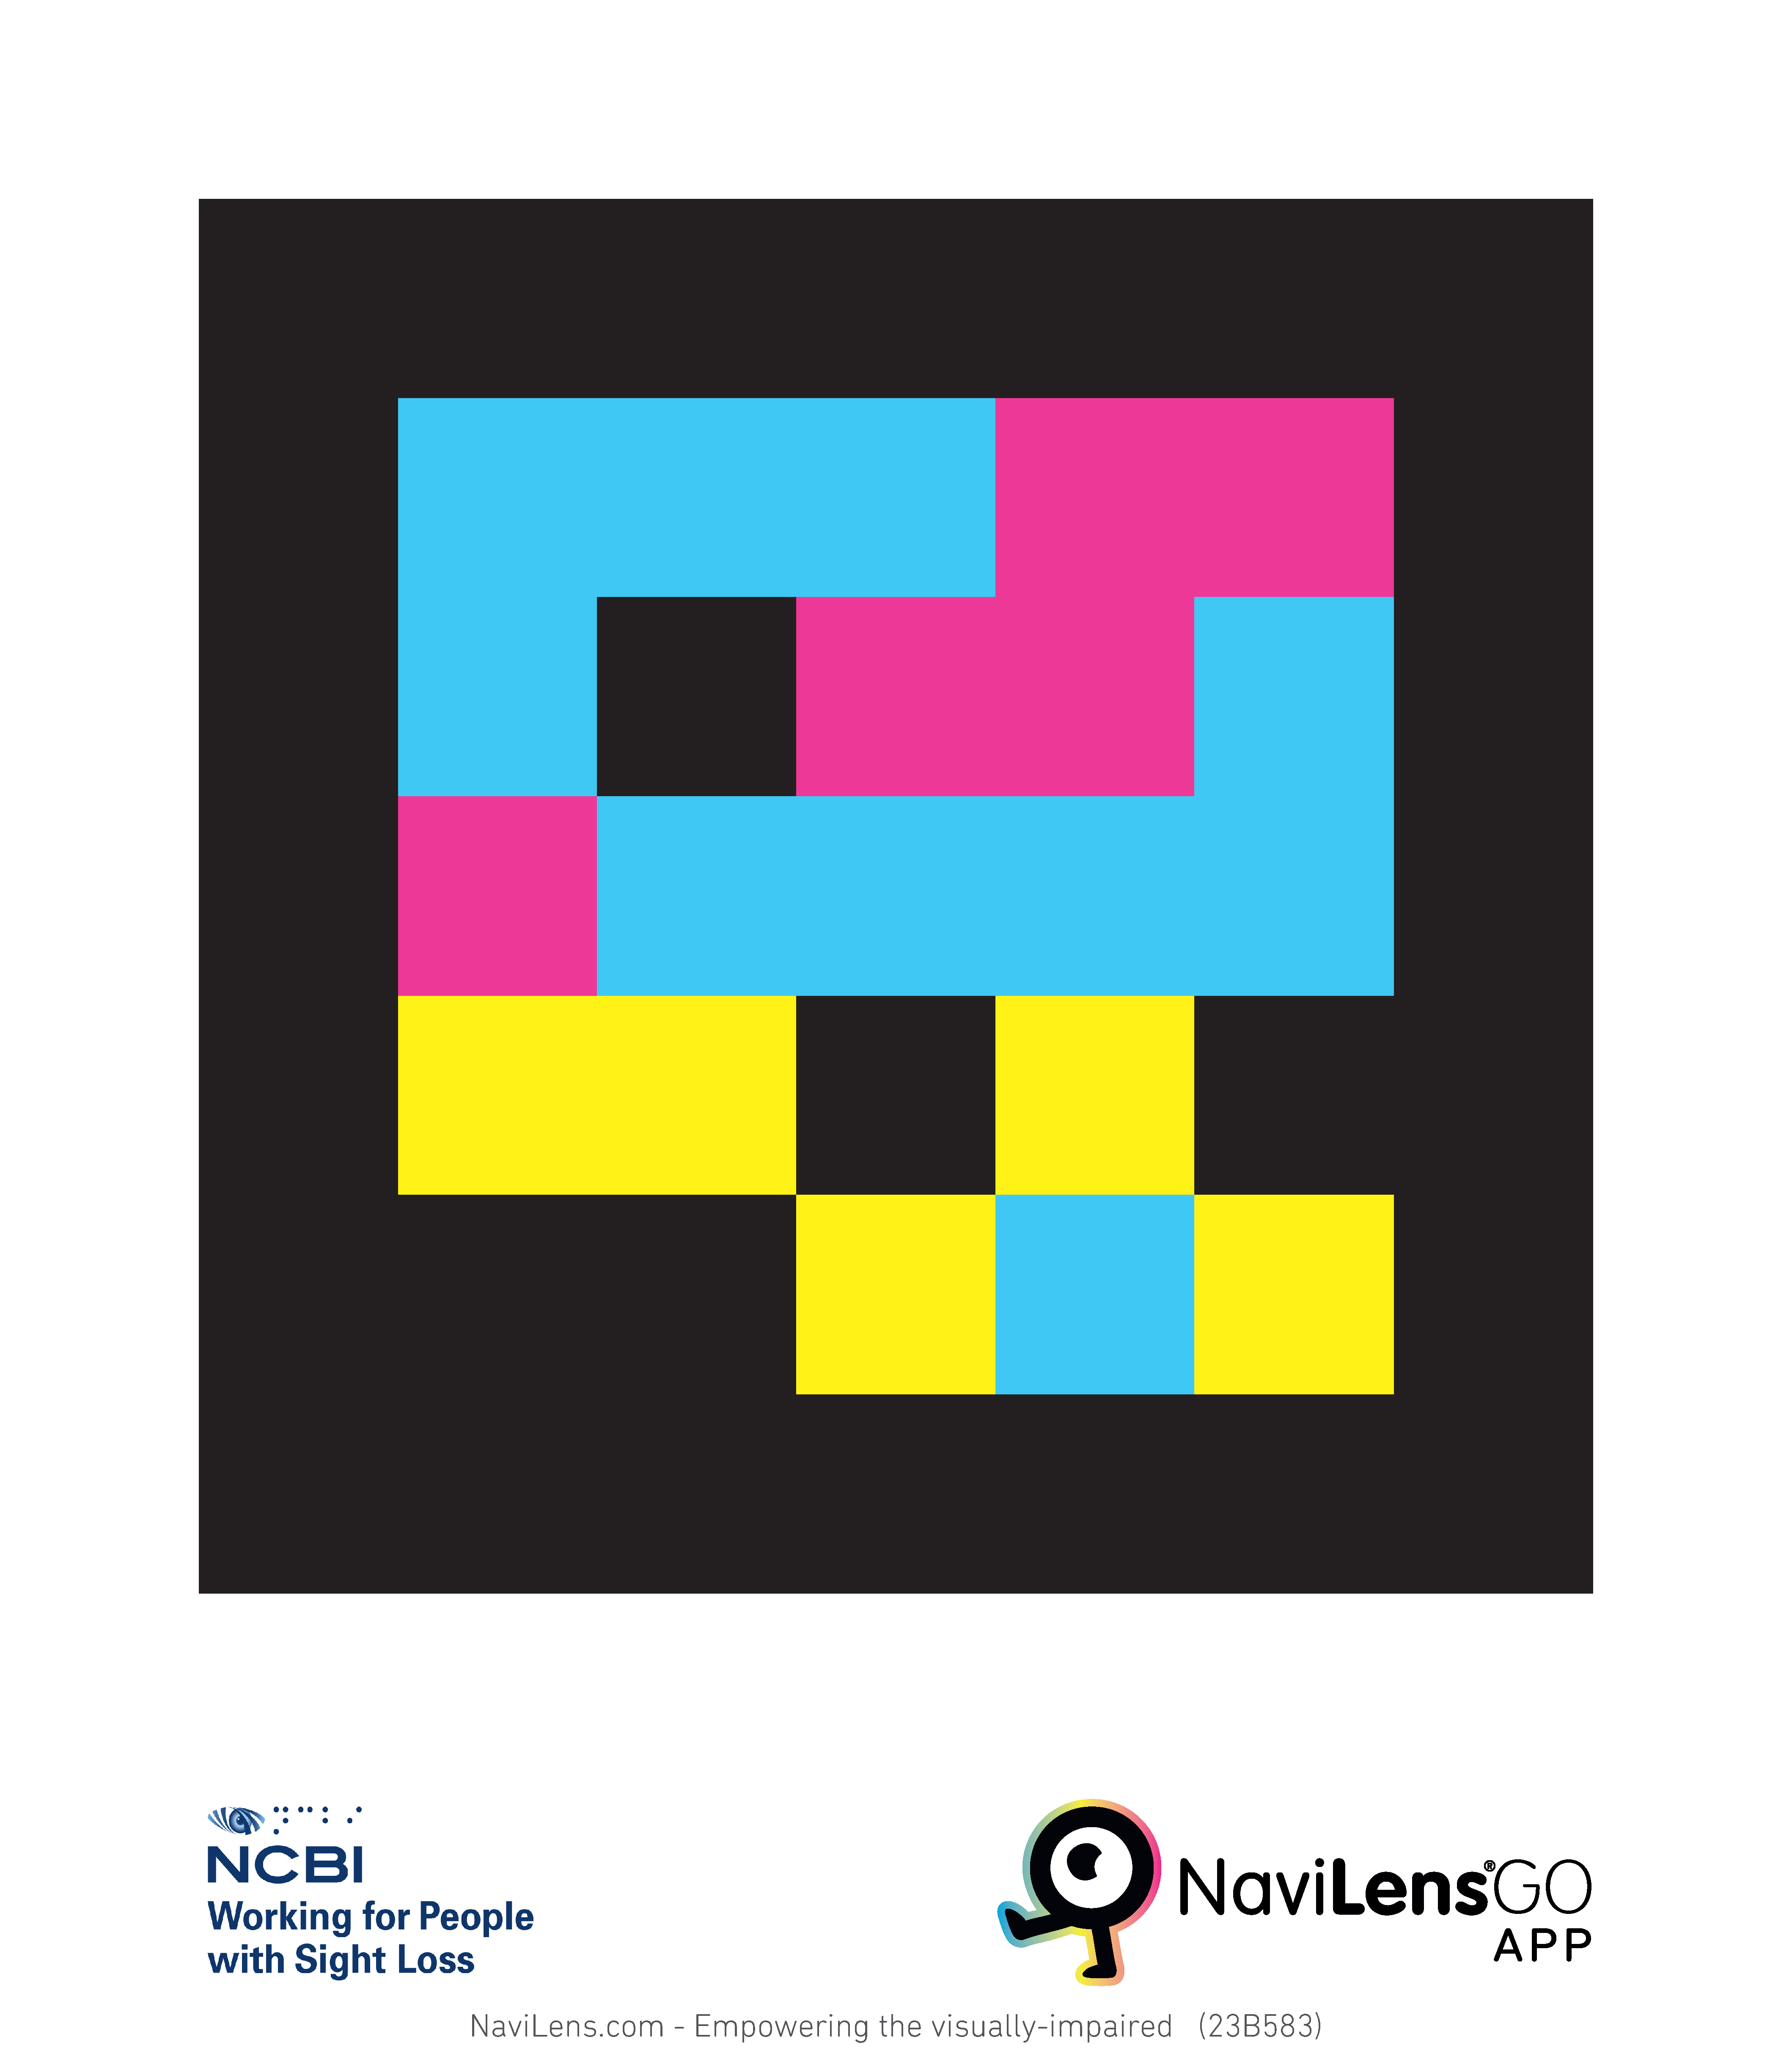 This is an example of a NaviLens barcode for the NCBI Head Office event which can be scanned using the app. The barcode is made of a blue, yellow and pink abstract shape on a black background.